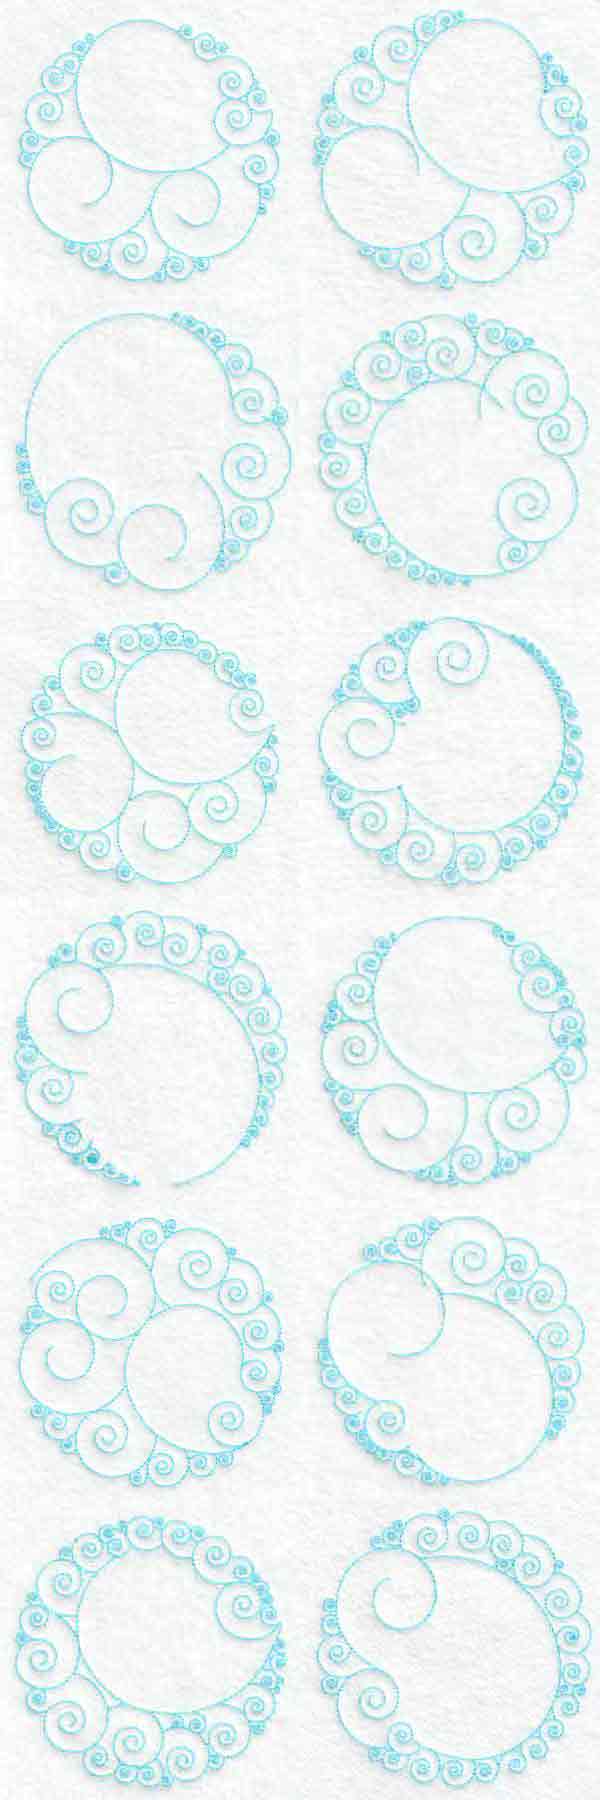 Circle Backgrounds Embroidery Machine Design Details